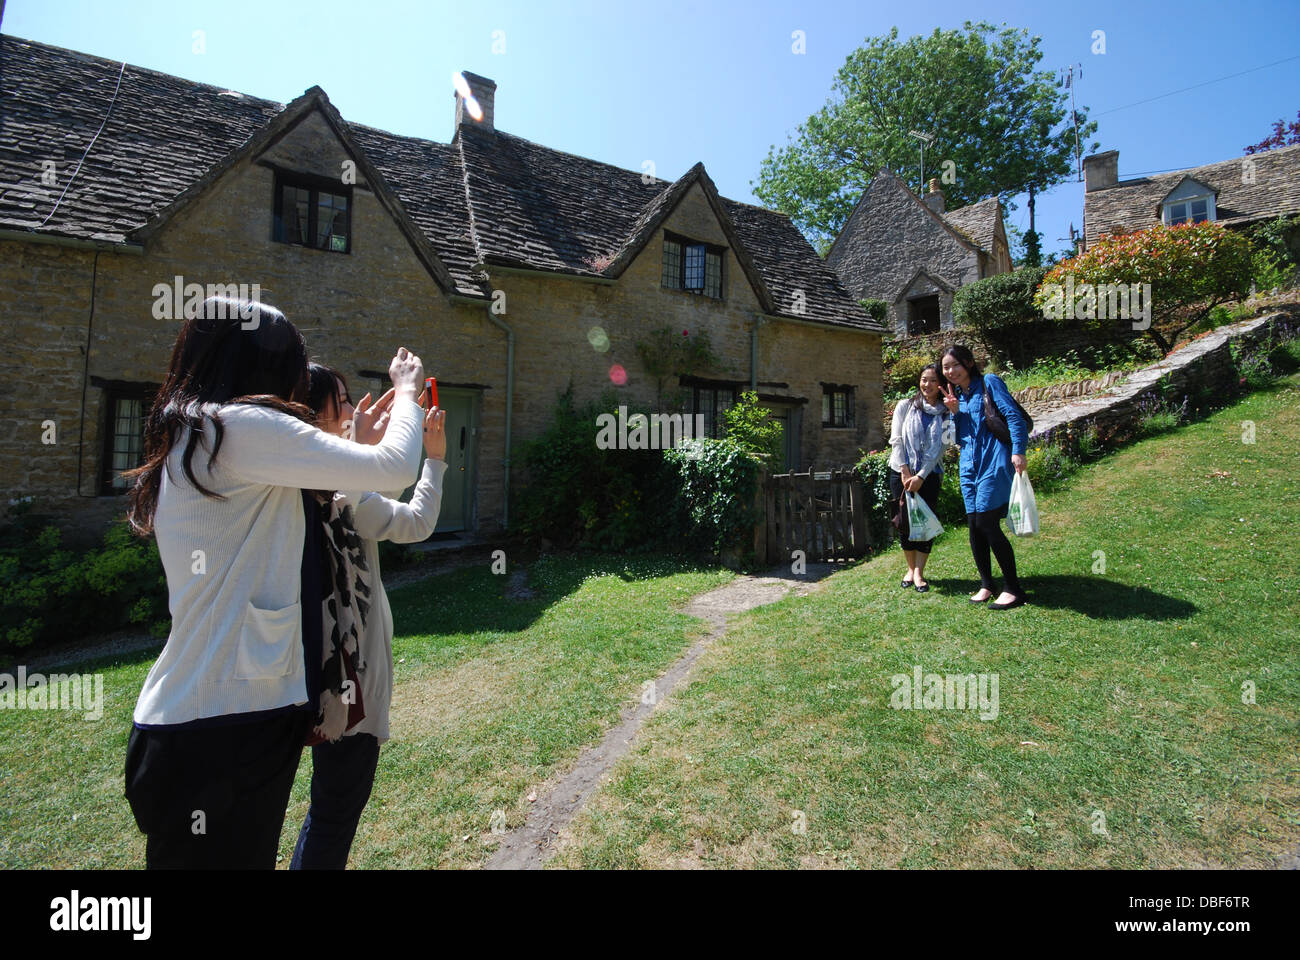 Asian tourists at Arlington Row, iconic row of 17th century Cotswolds cottages in Bibury, United Kingdom Stock Photo